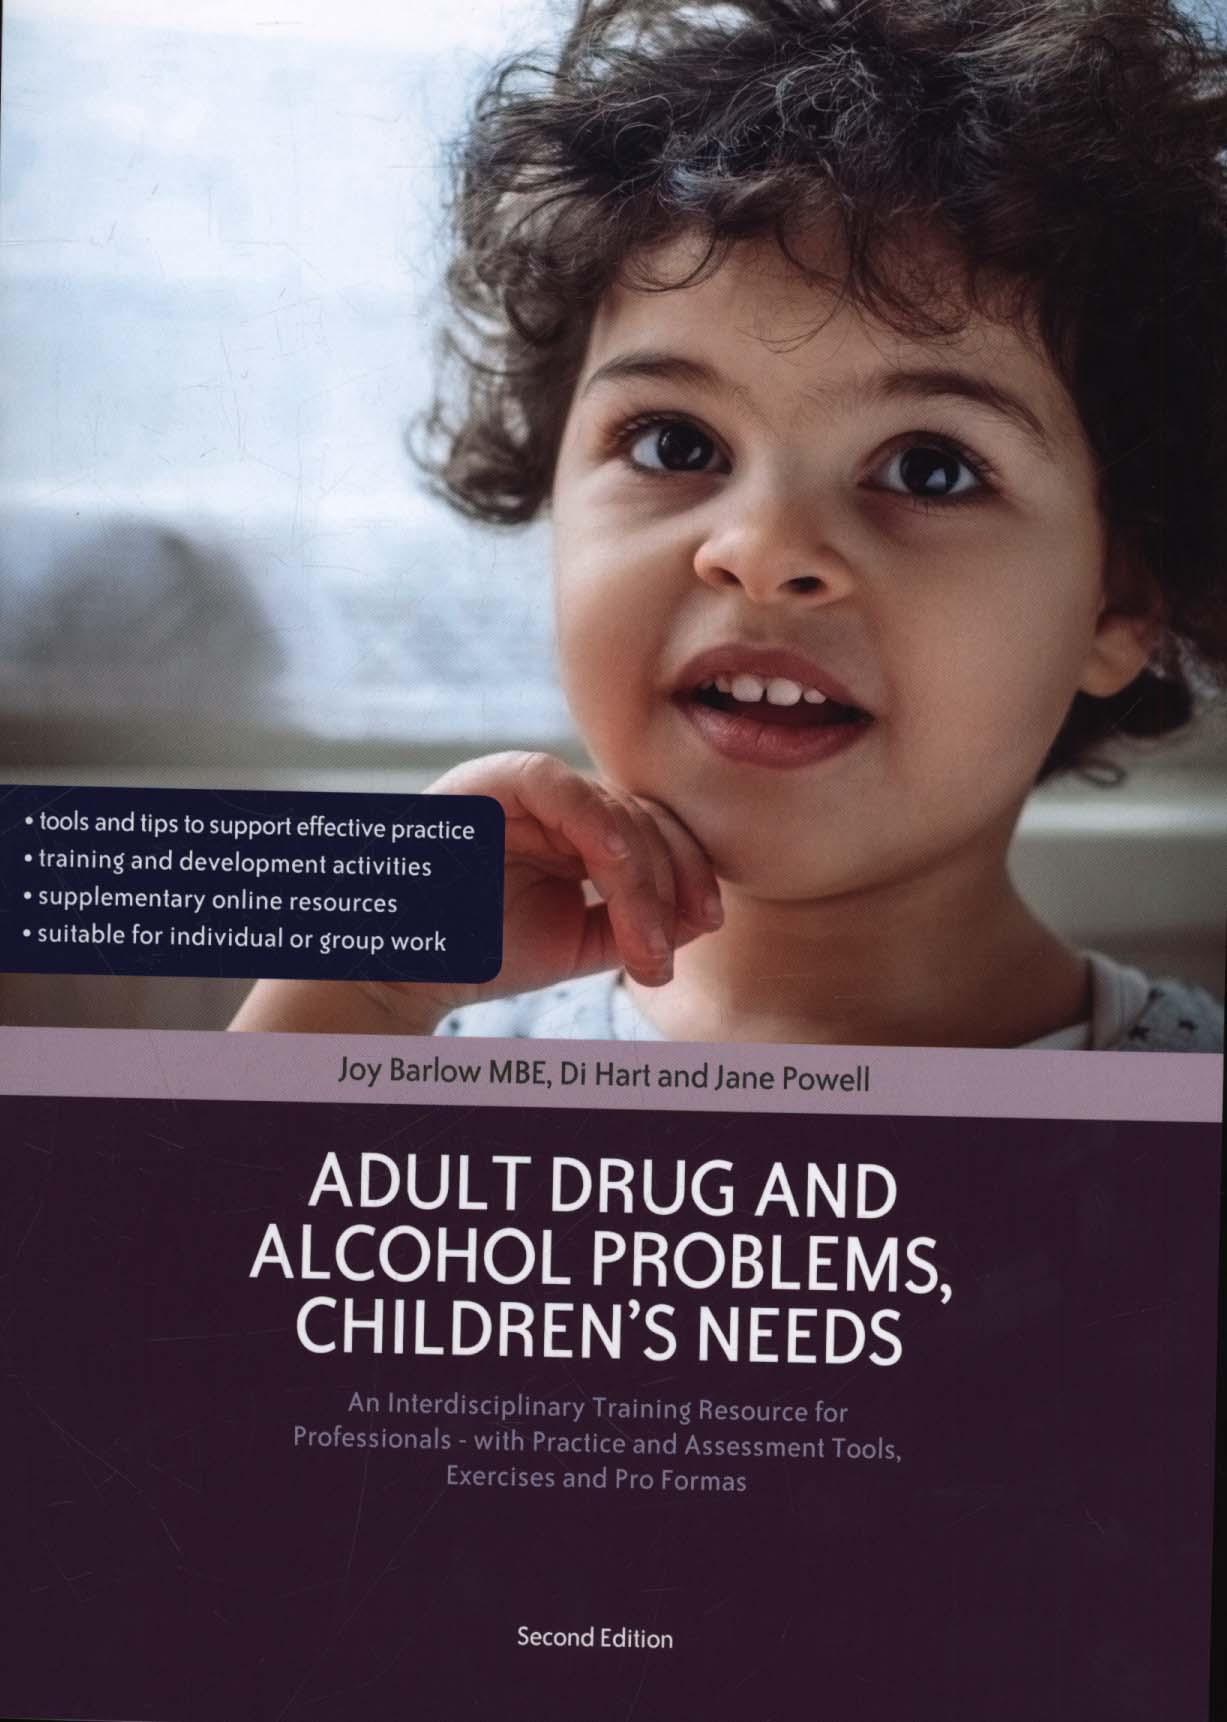 Adult Drug and Alcohol Problems, Children's Needs, Second Ed